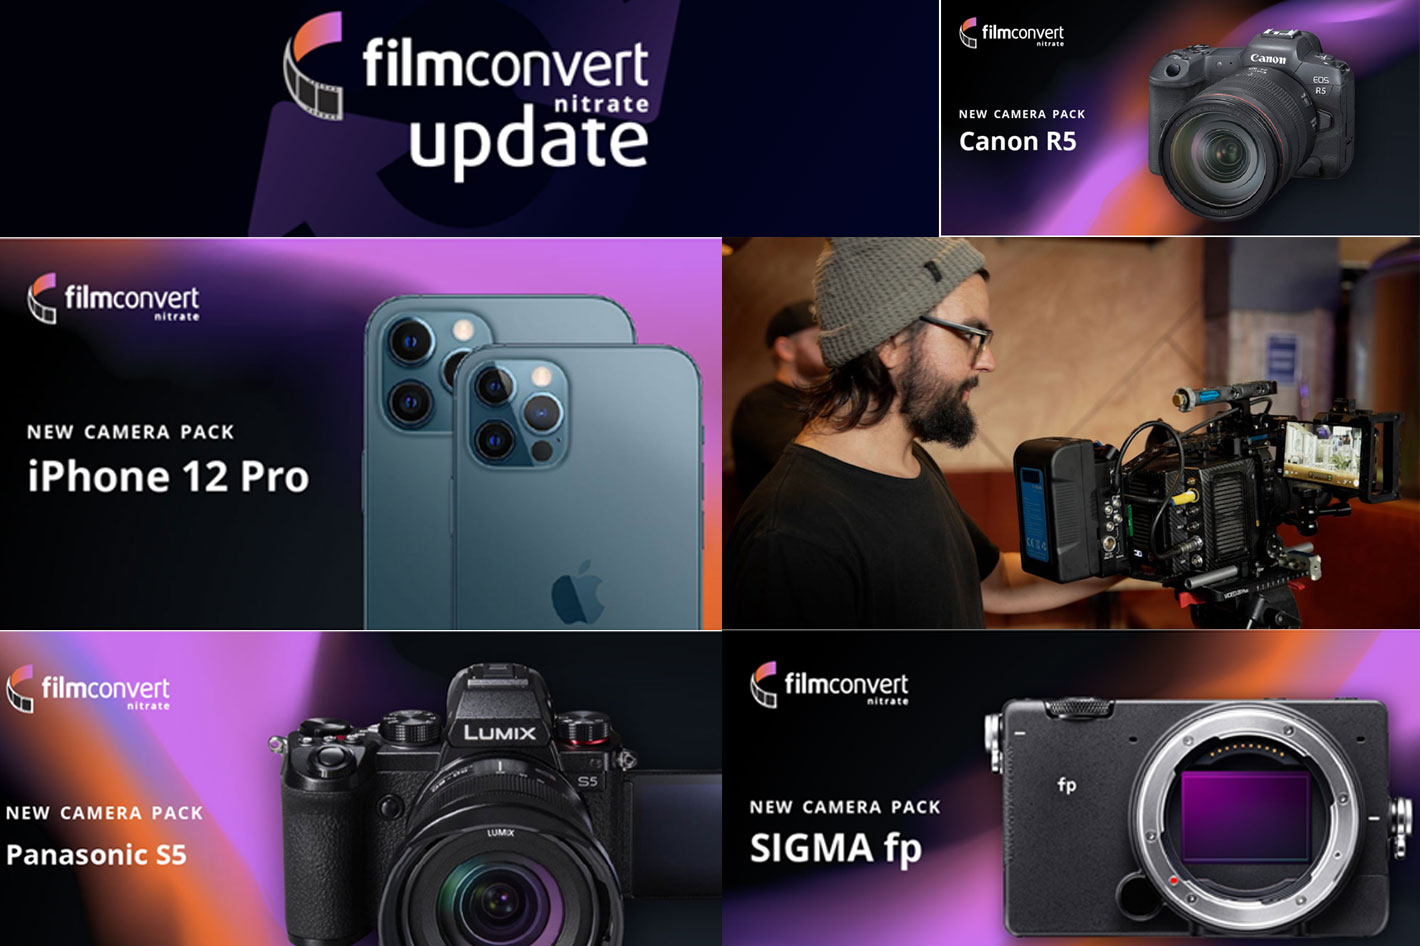 FilmConvert: all the new Camera Packs released in 2021